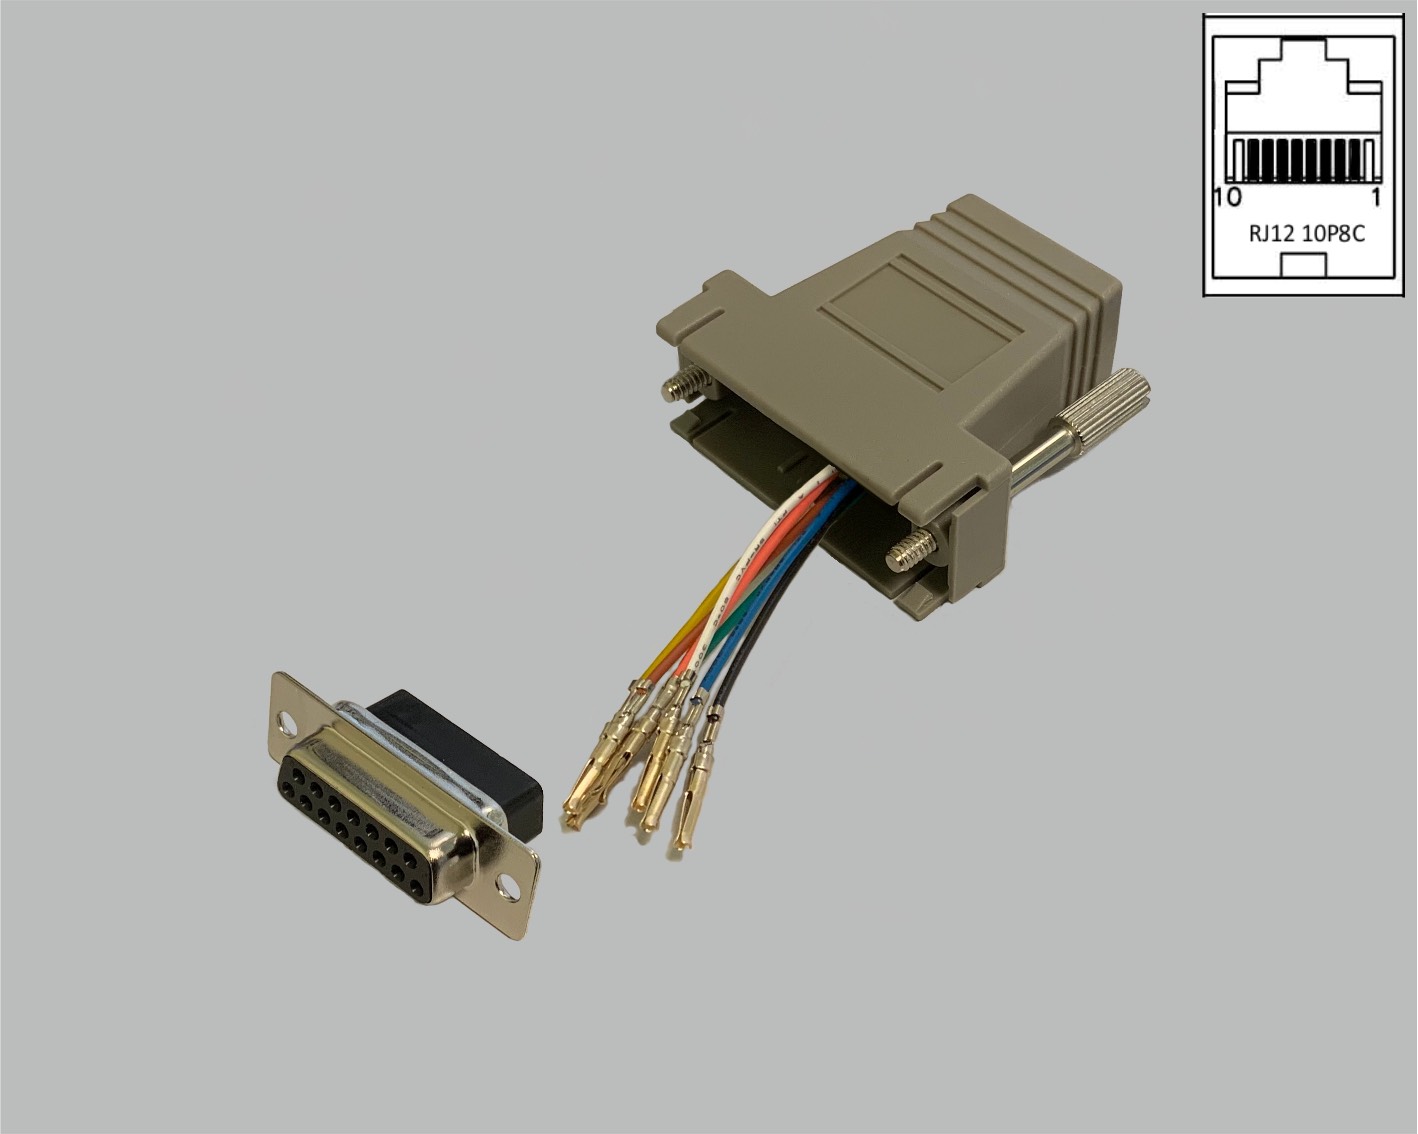 D-Sub/RJ adapter, freely configurable, D-Sub female connector 15-pole to RJ45 (10P8C) female connector, grey